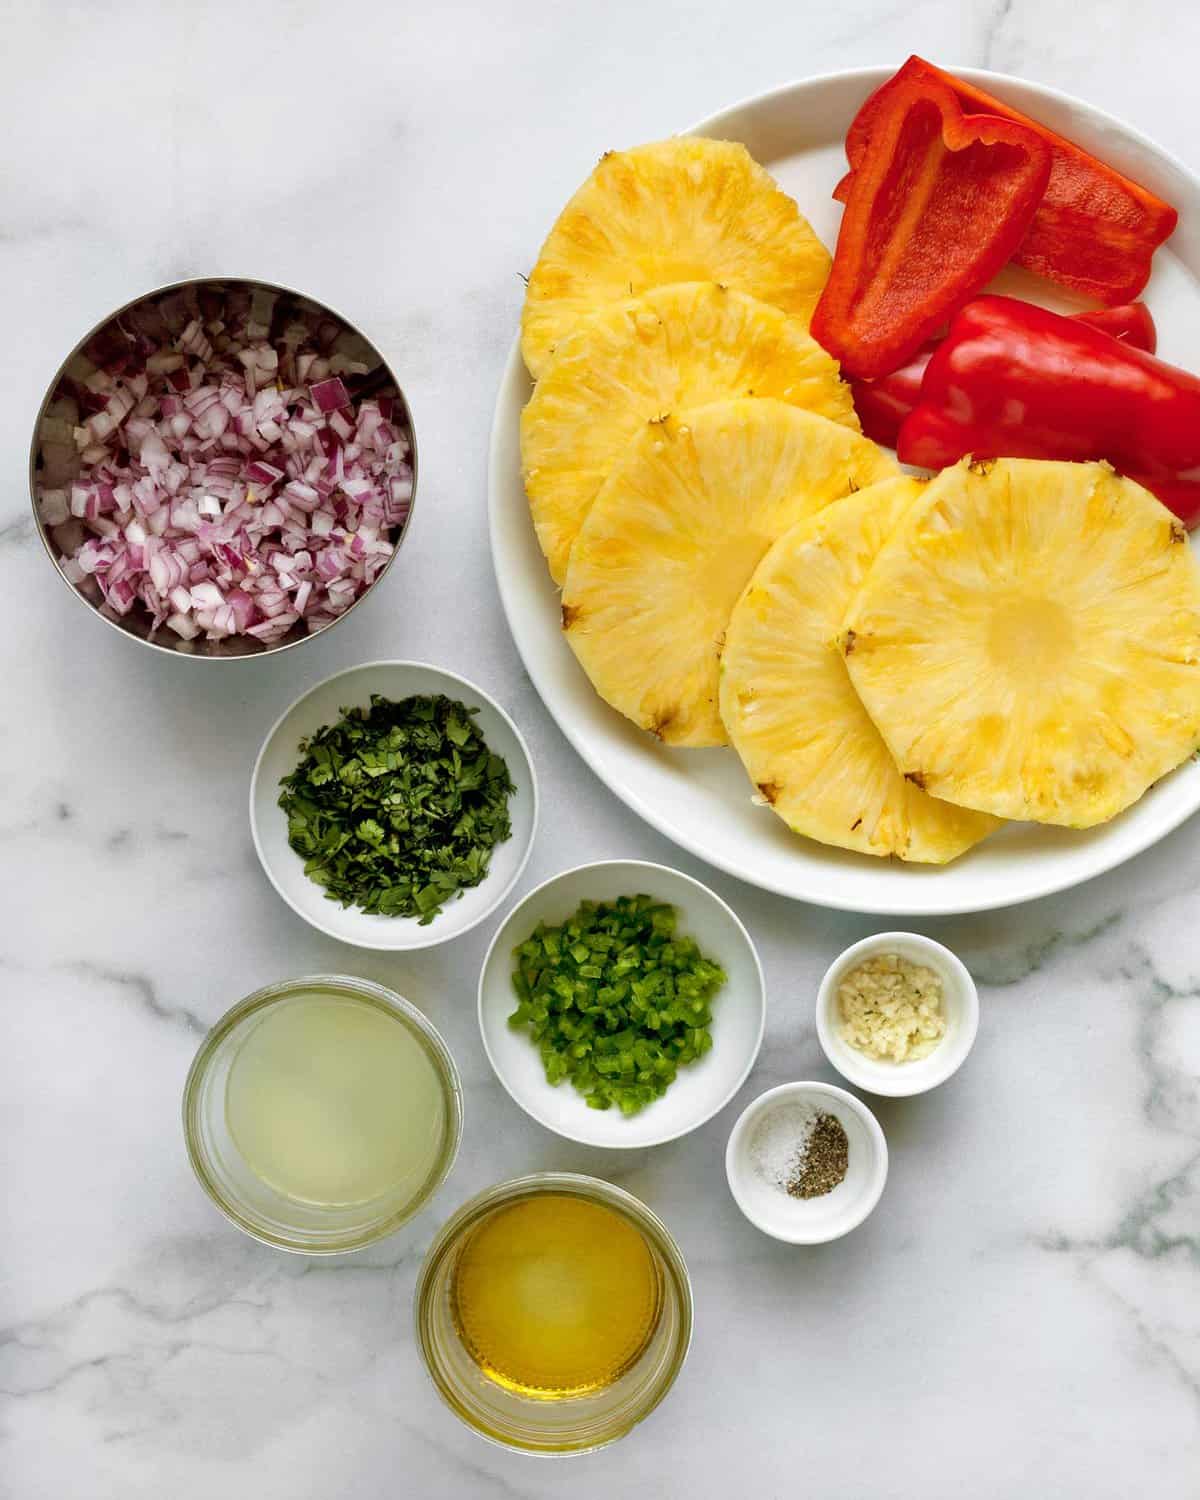 Ingredients including pineapple, red peppers, onions, jalapenos, cilantro, lime juice, garlic, salt & pepper.